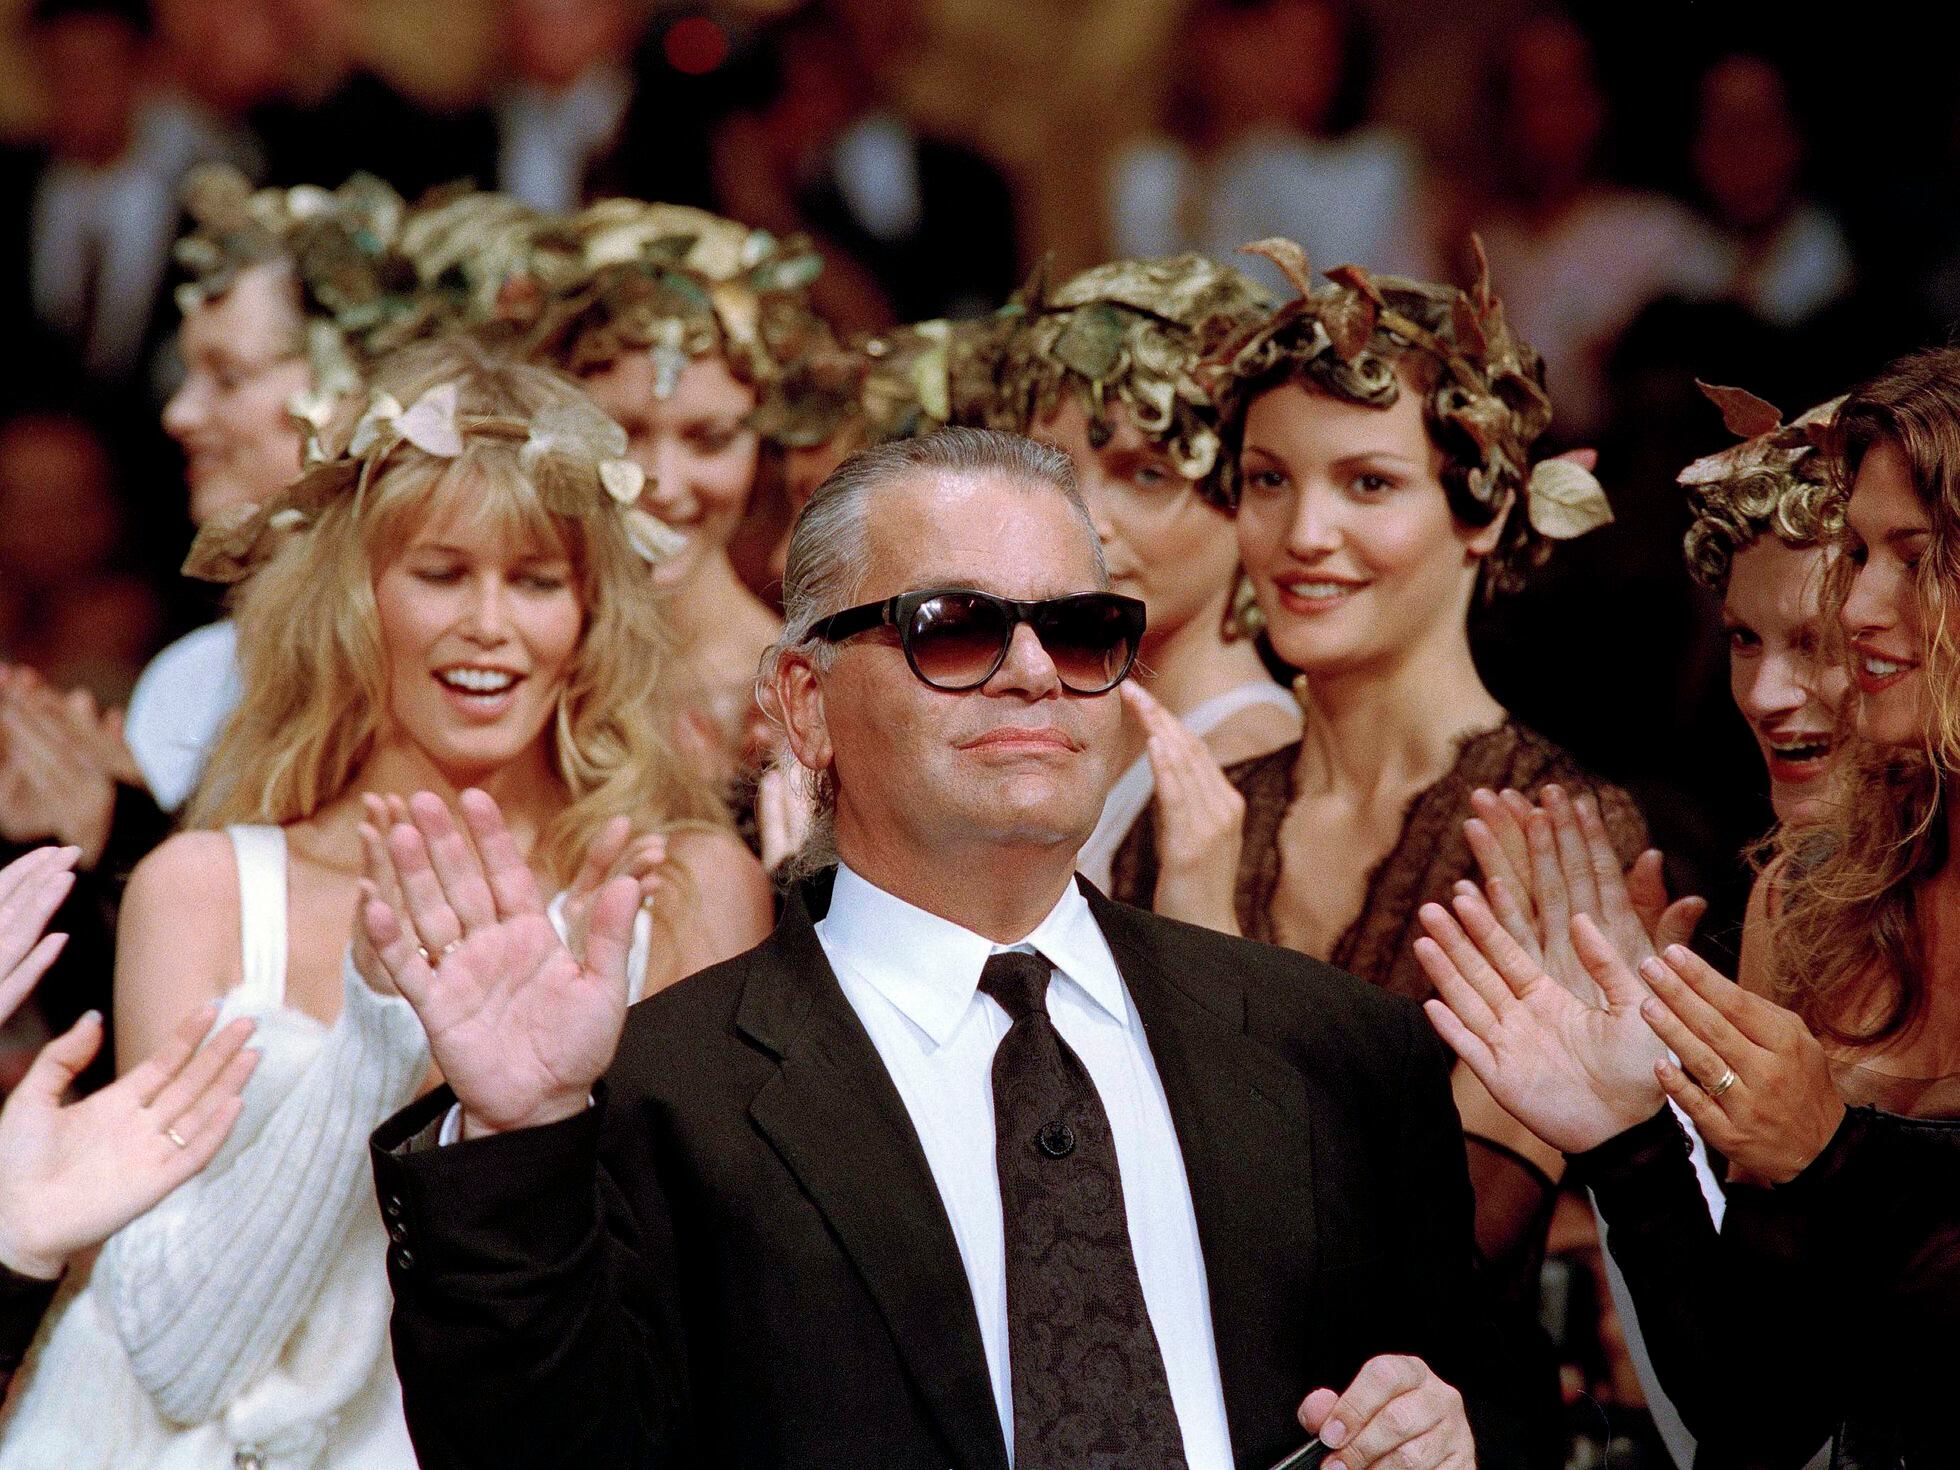 A Celebration of Karl Lagerfeld's Work in Vogue